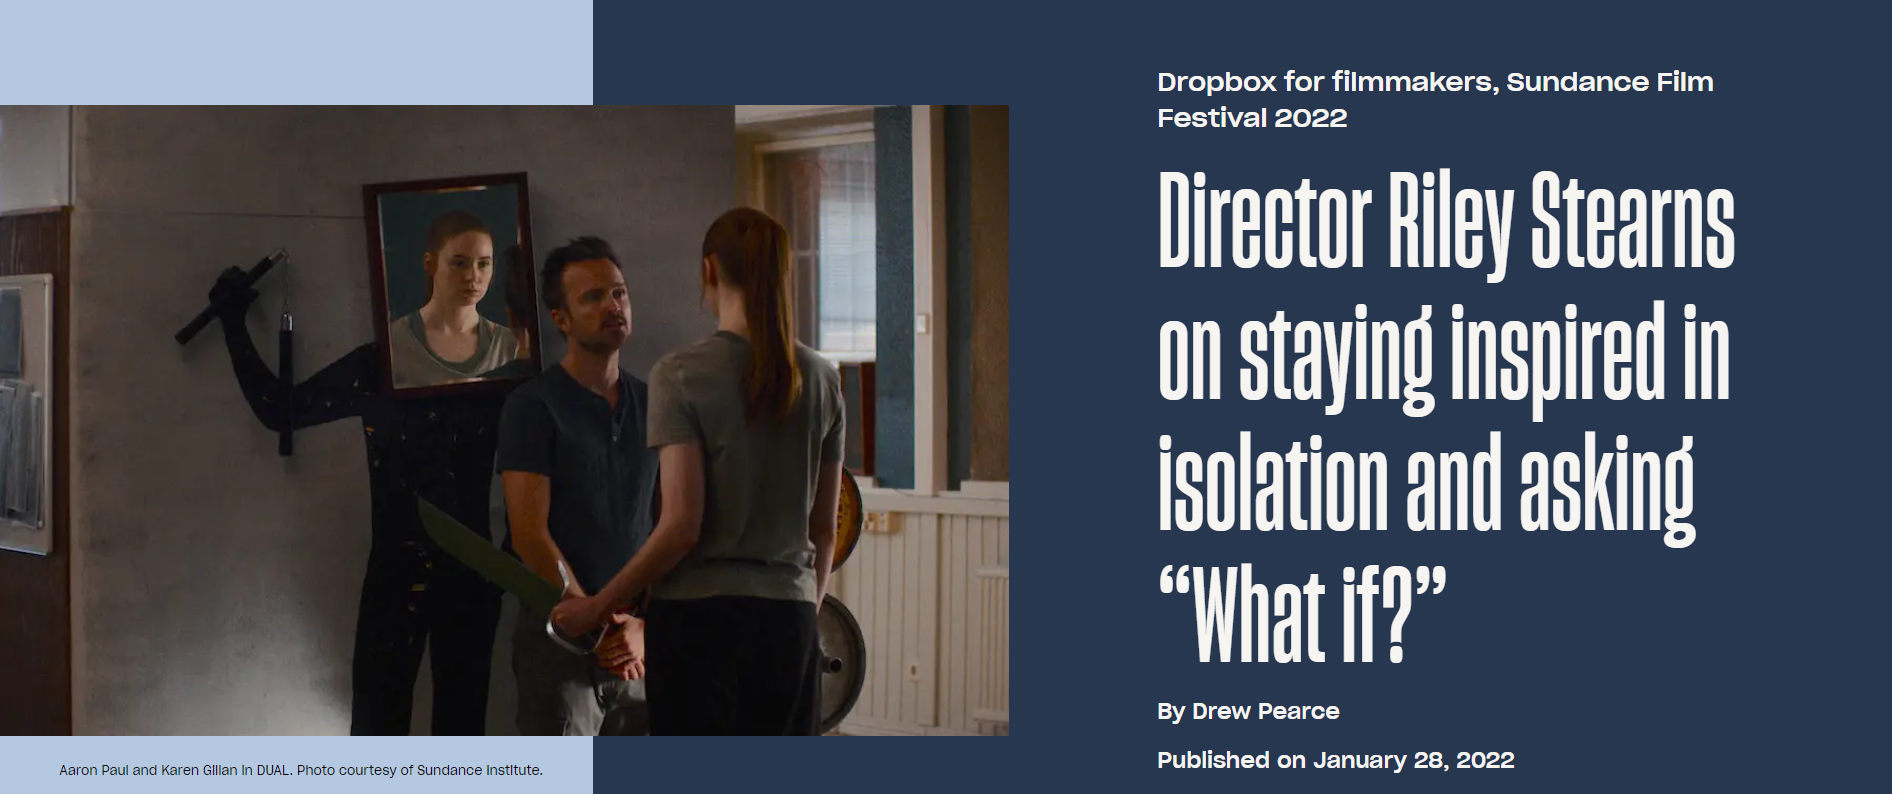 Director Riley Stearns on staying inspired in isolation and asking “What  if?”